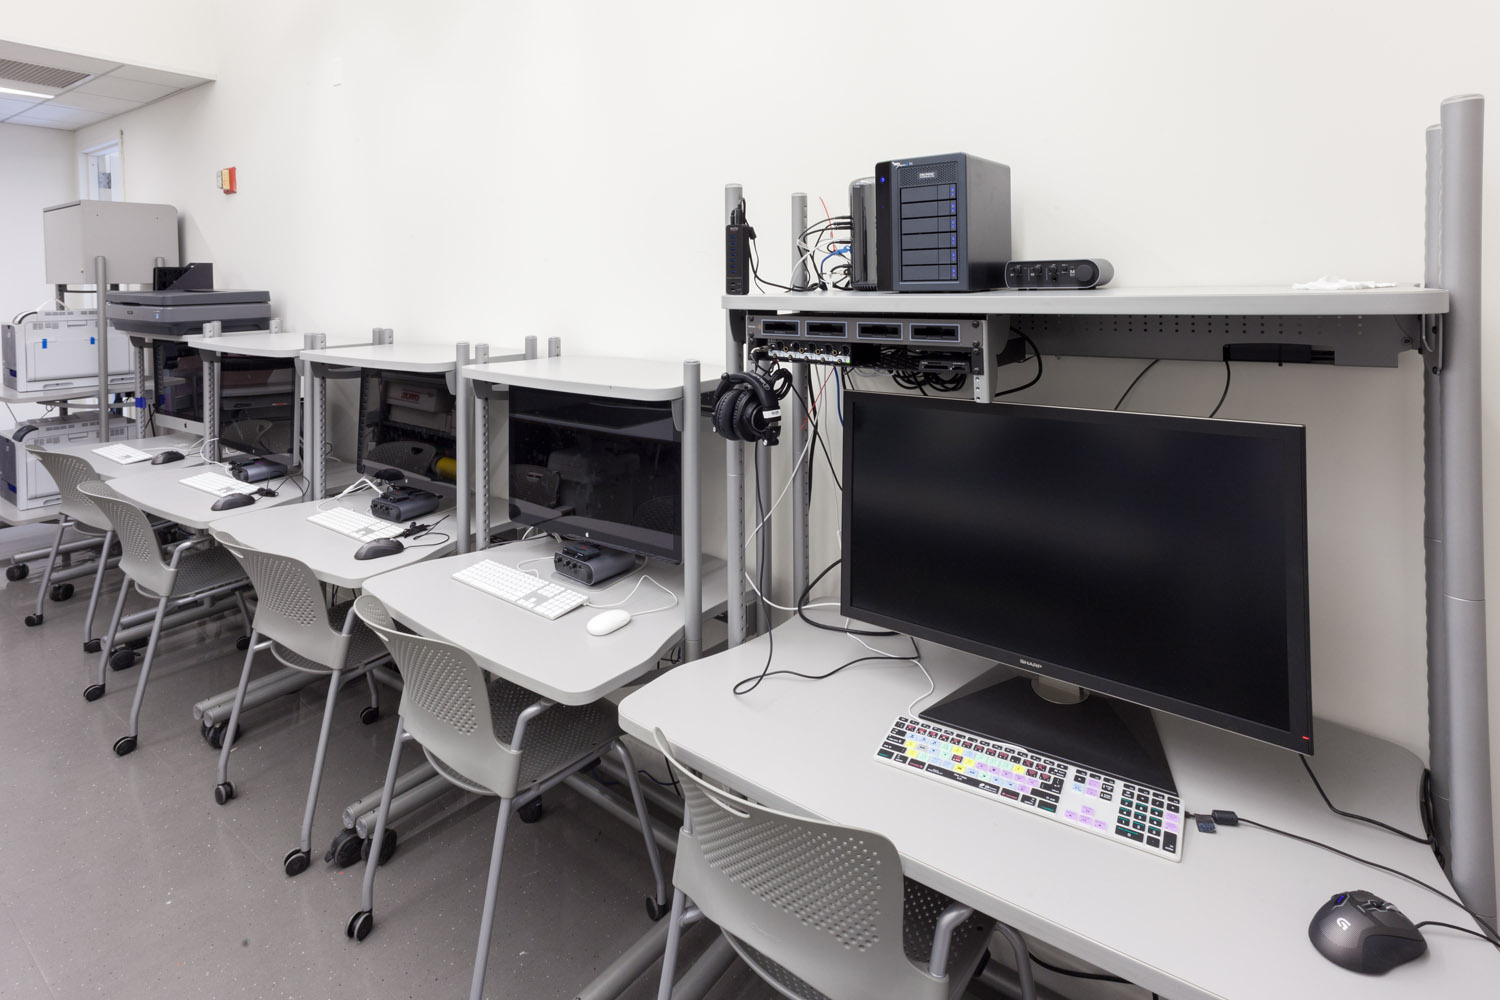 There is a view of the computer lab with computers sitting on desks along the wall.